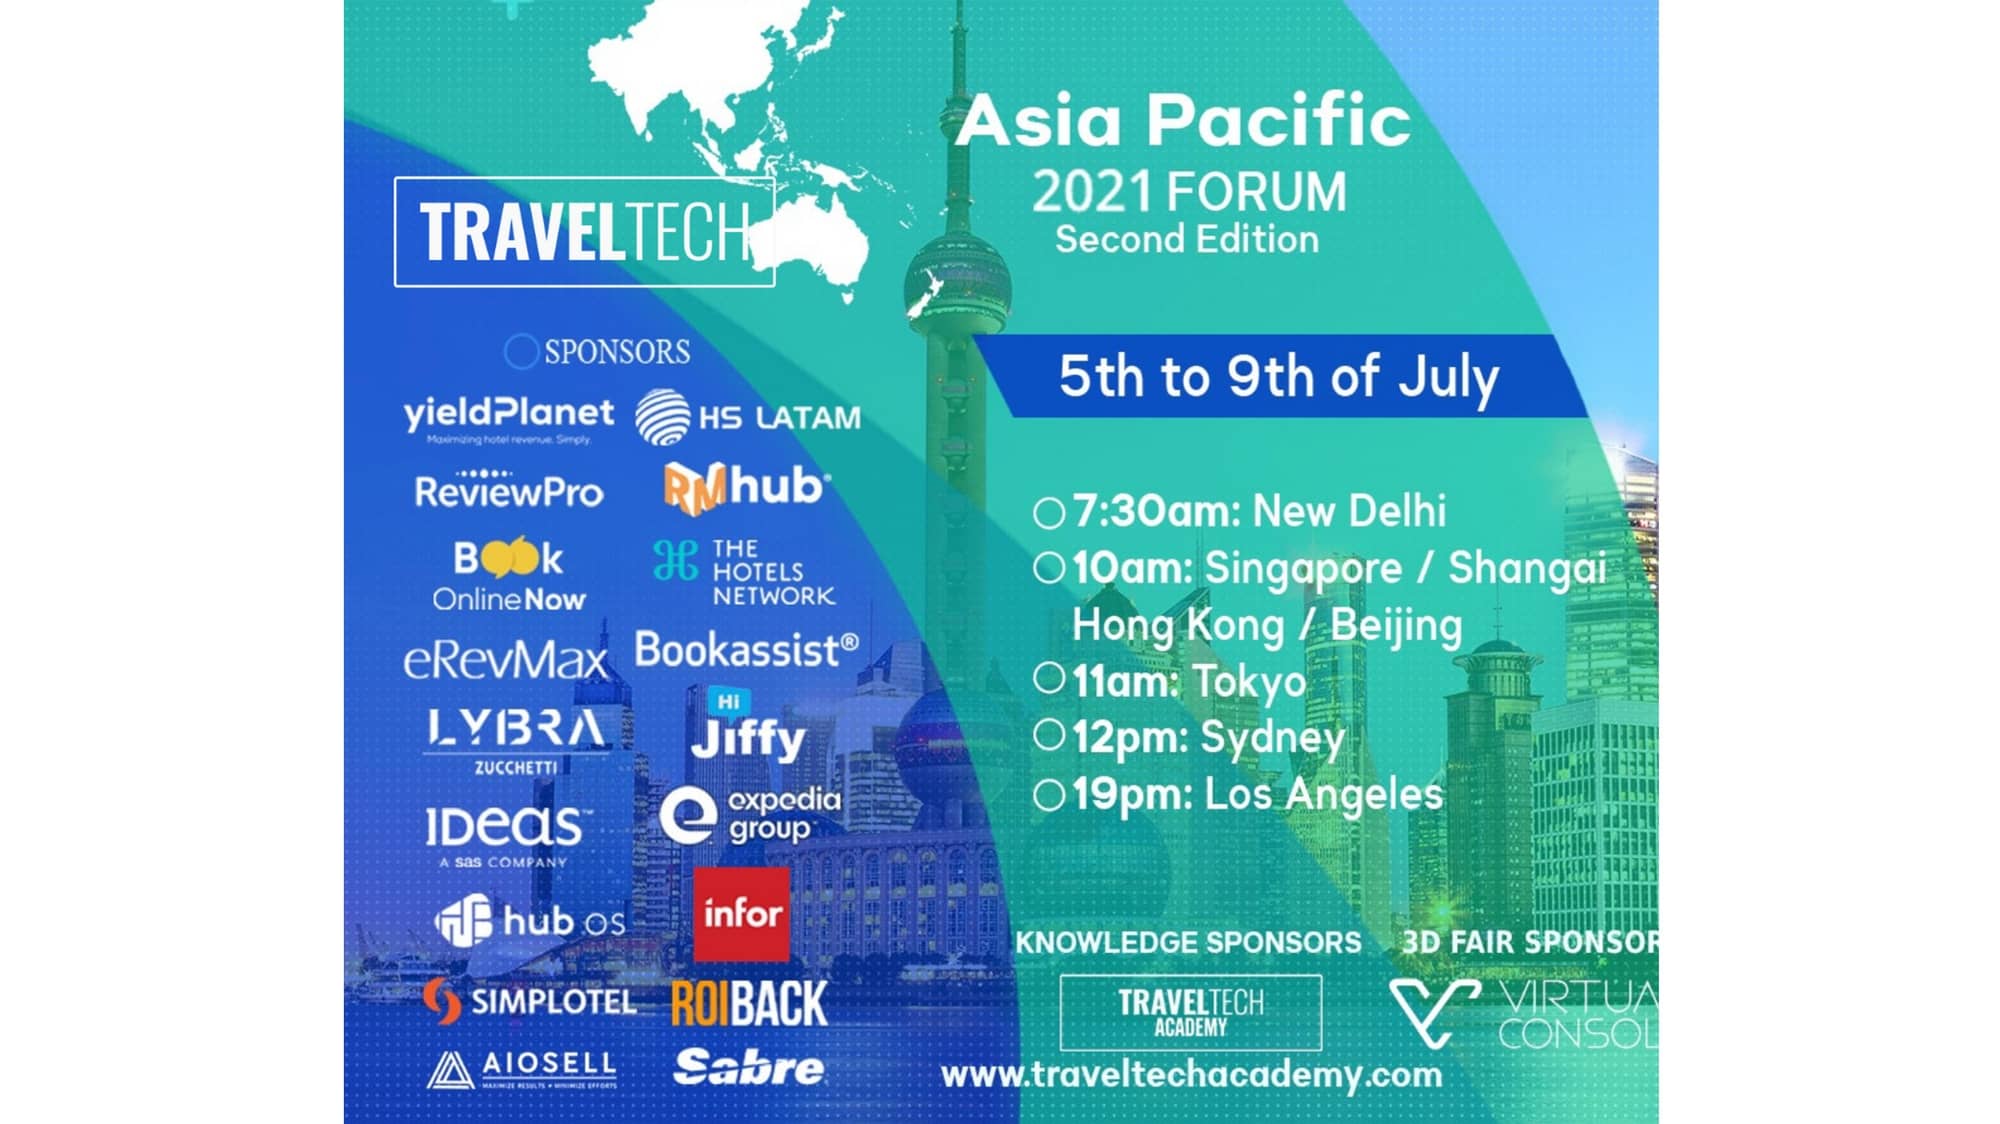 Hijiffy participated in travel tech apac 2021